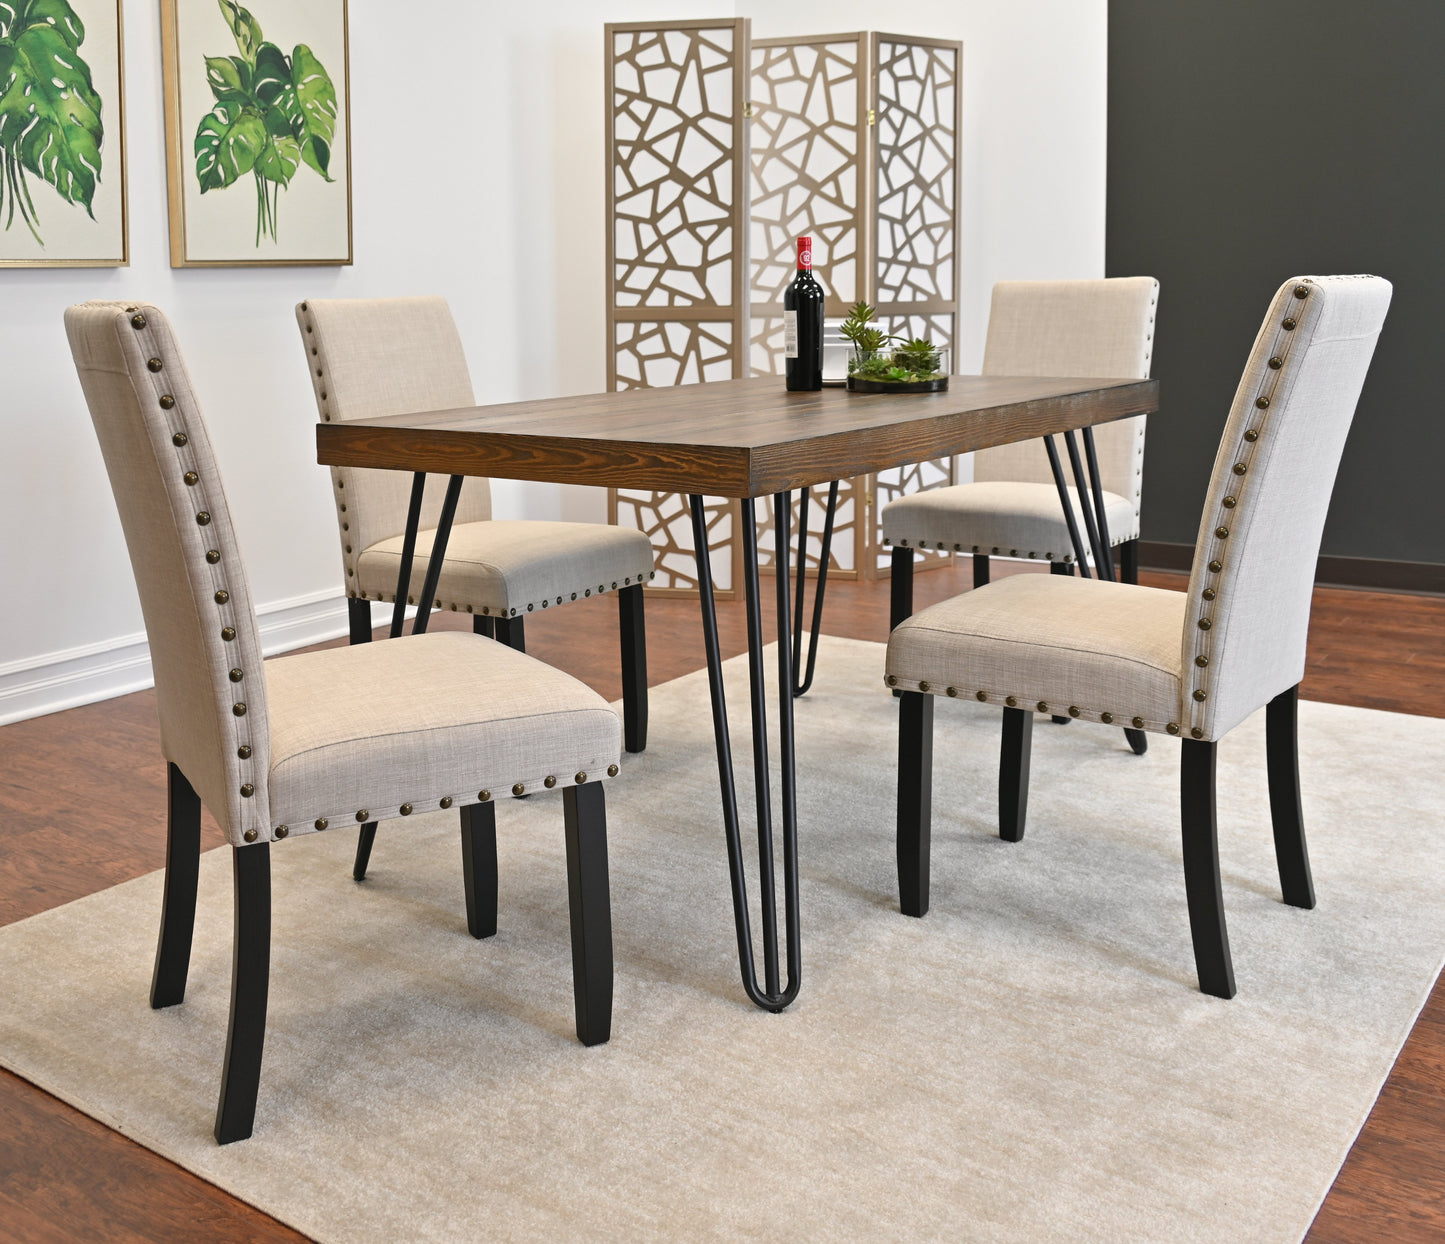 Amisos 5-Piece Dining Set, Hairpin Dining Table with 4 Chairs, 3 Color Options